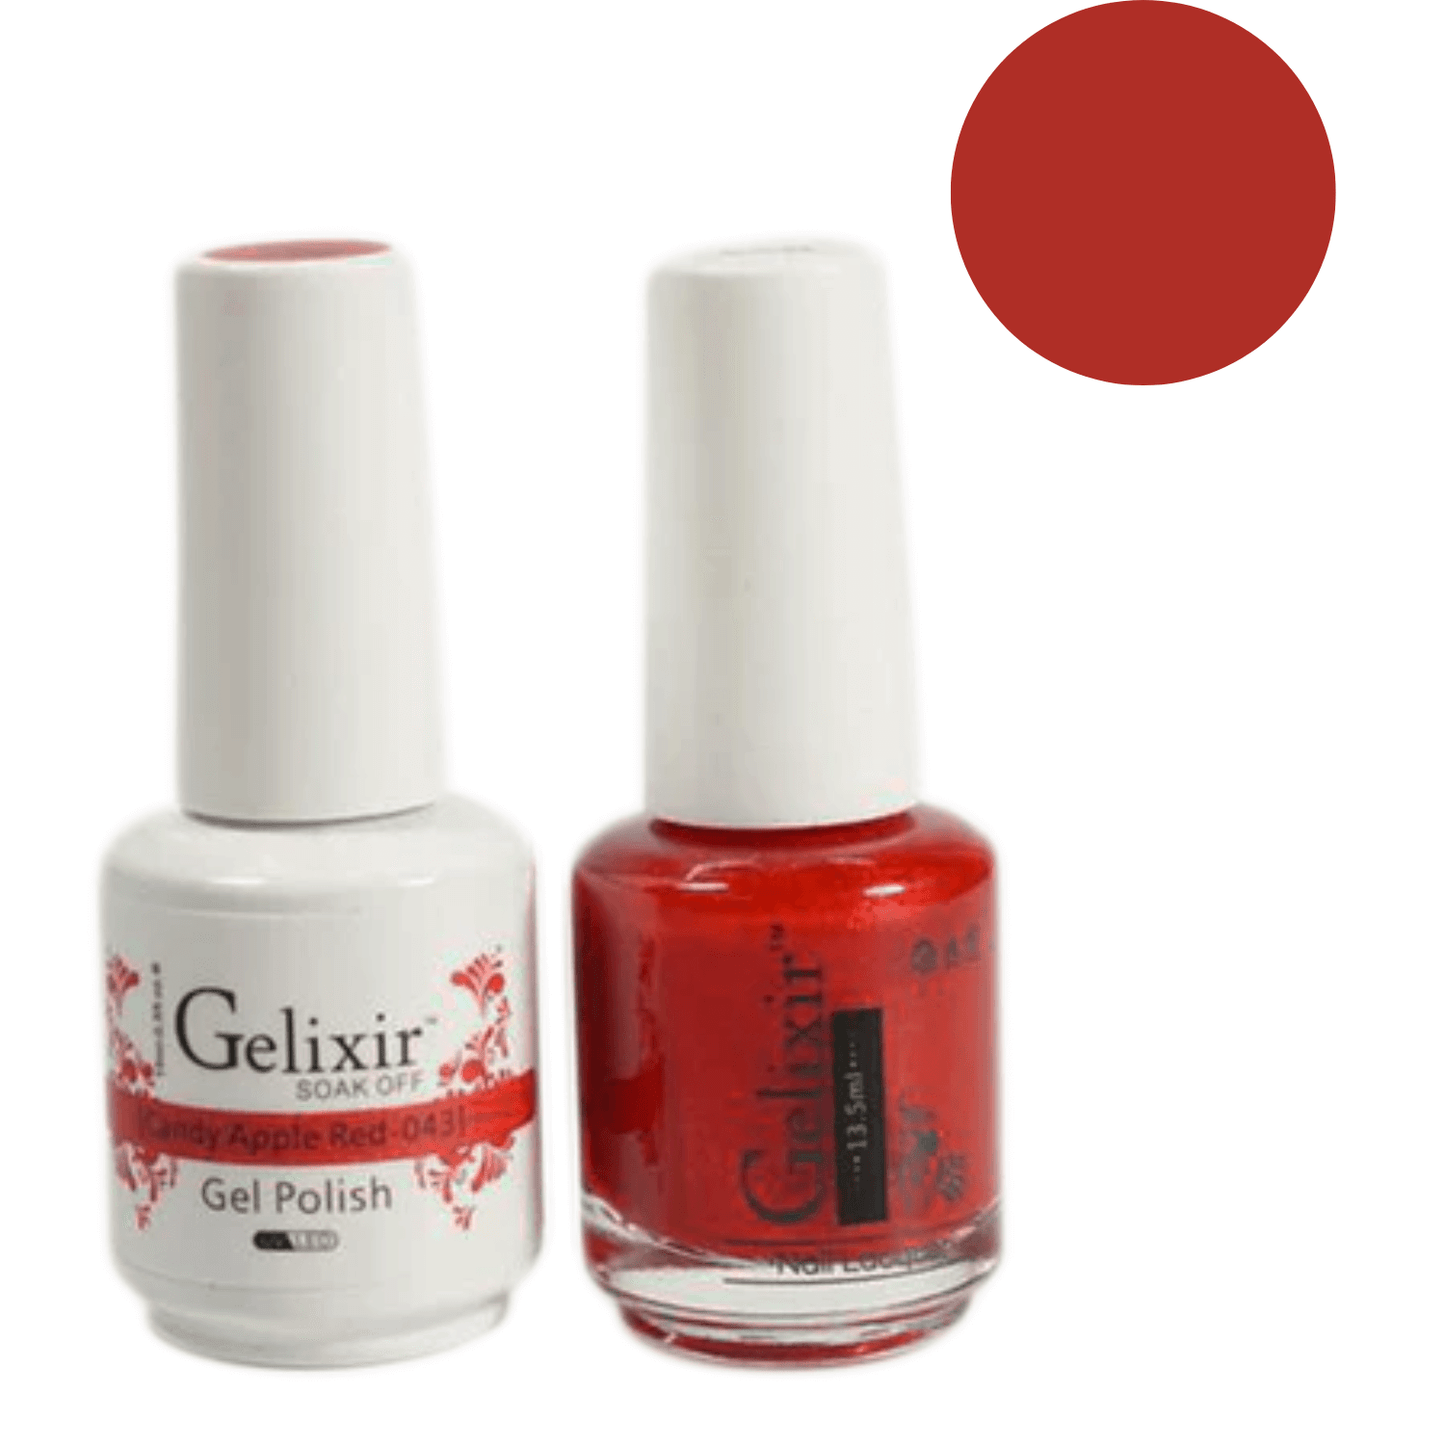 Gelixir Gel Polish & Nail Lacquer Duo Candy Apple Red - #43 - Premier Nail Supply 